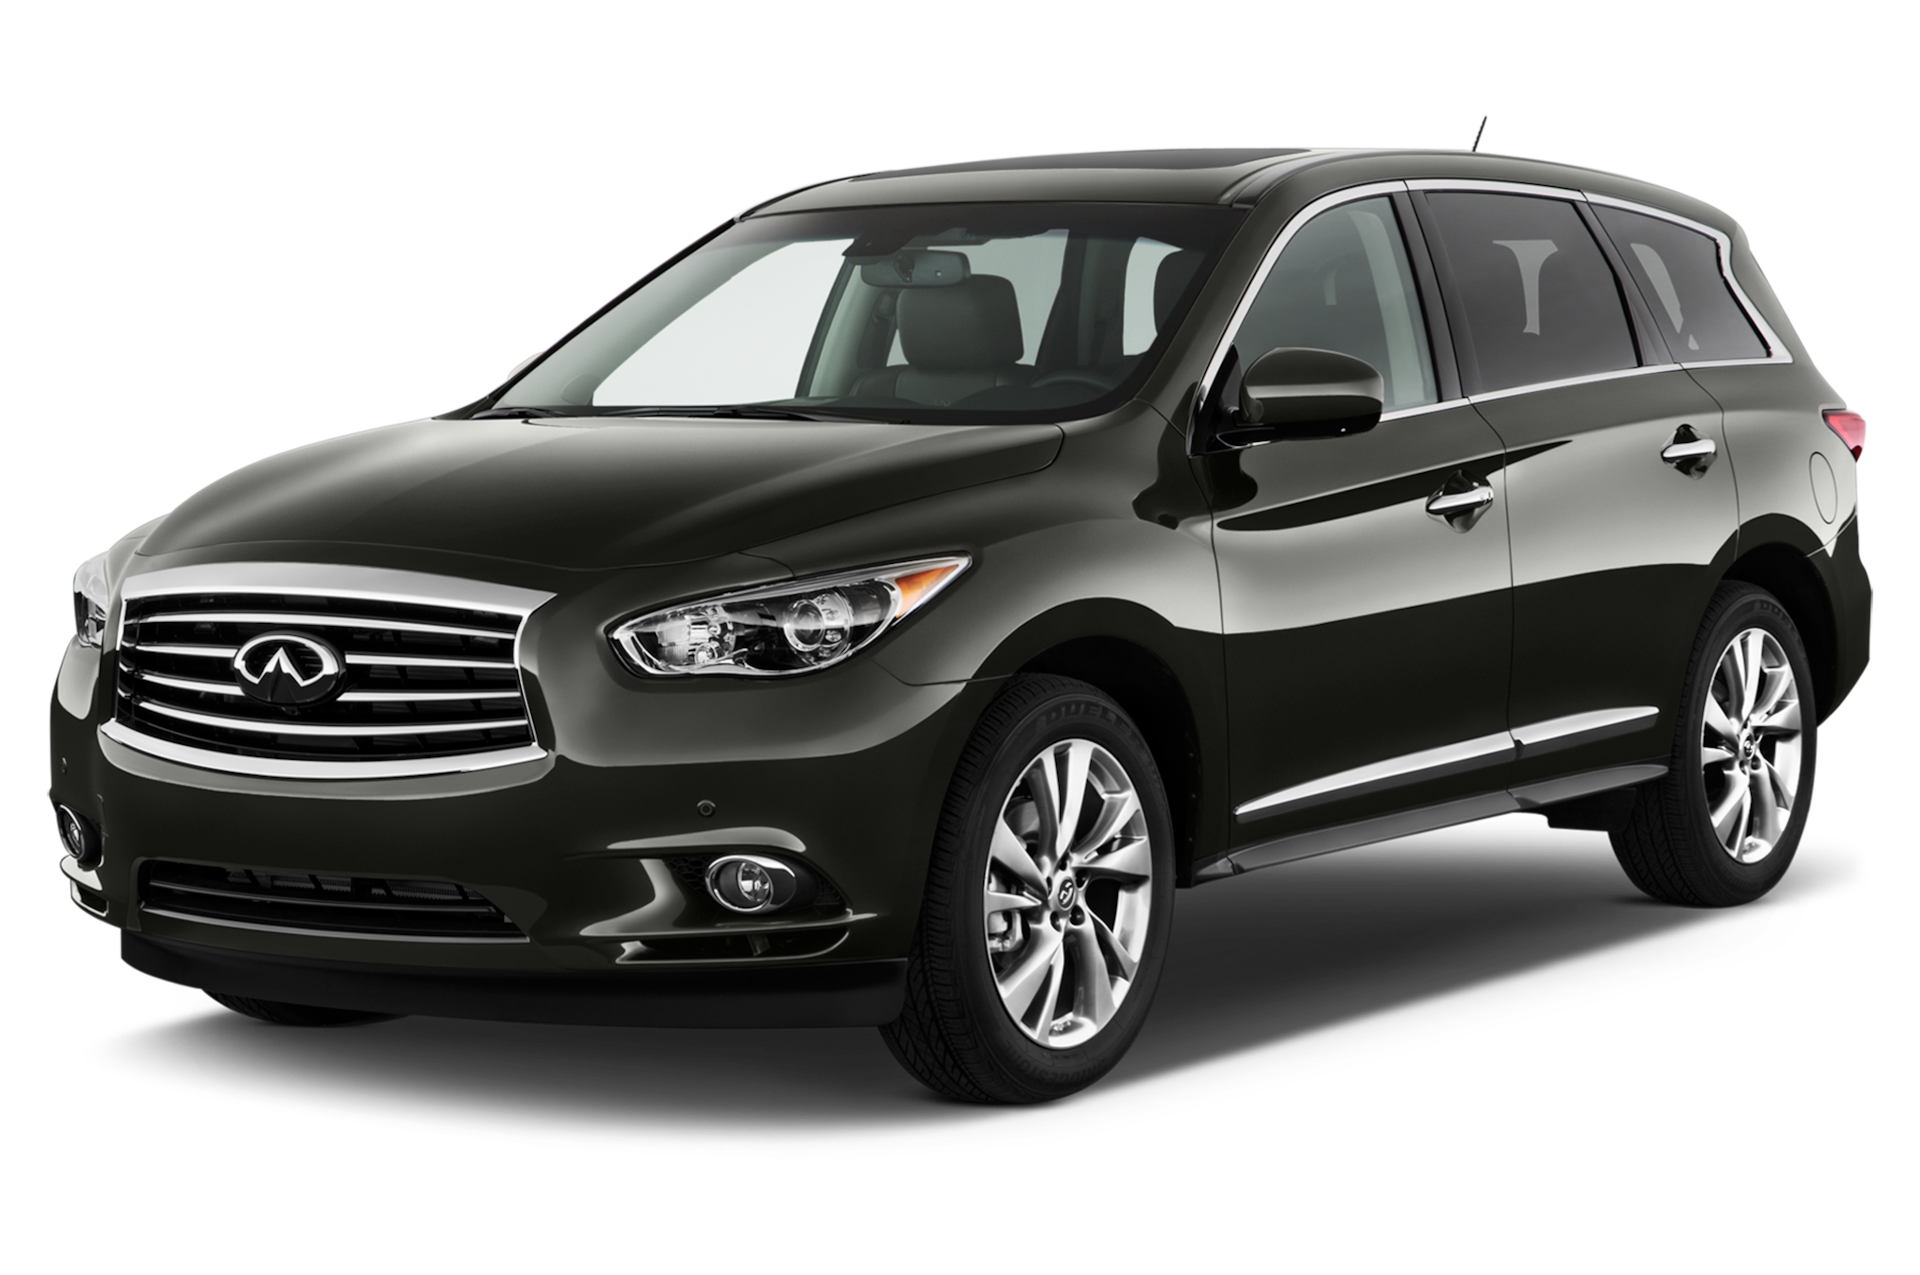 2013 Infiniti JX35 Prices, Reviews, and Photos - MotorTrend